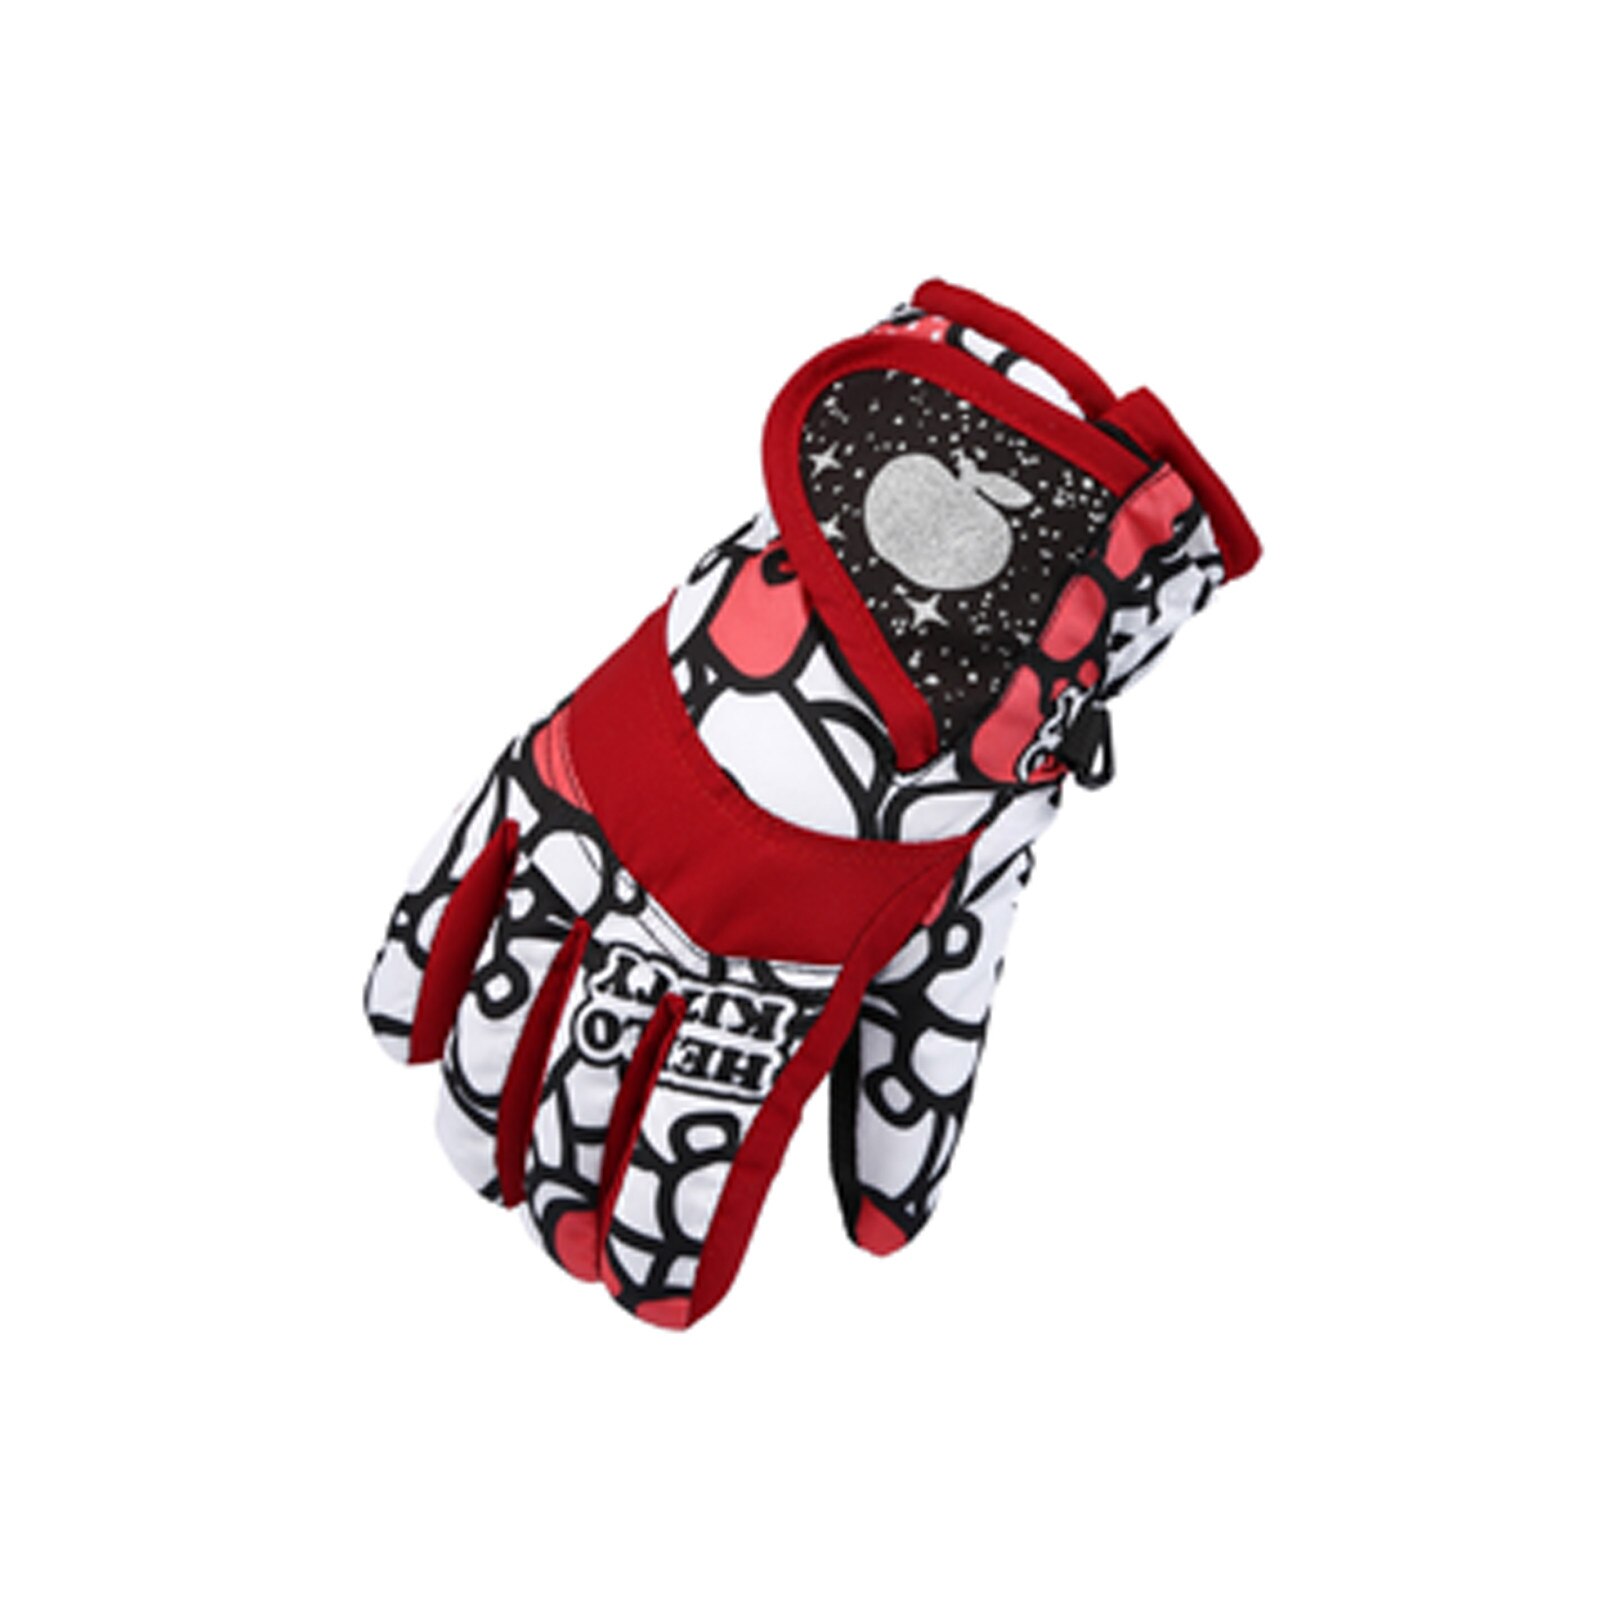 Newest Winter Gloves for Kids Boys Girls Snow Windproof Mittens Outdoor Sports Skiing: B